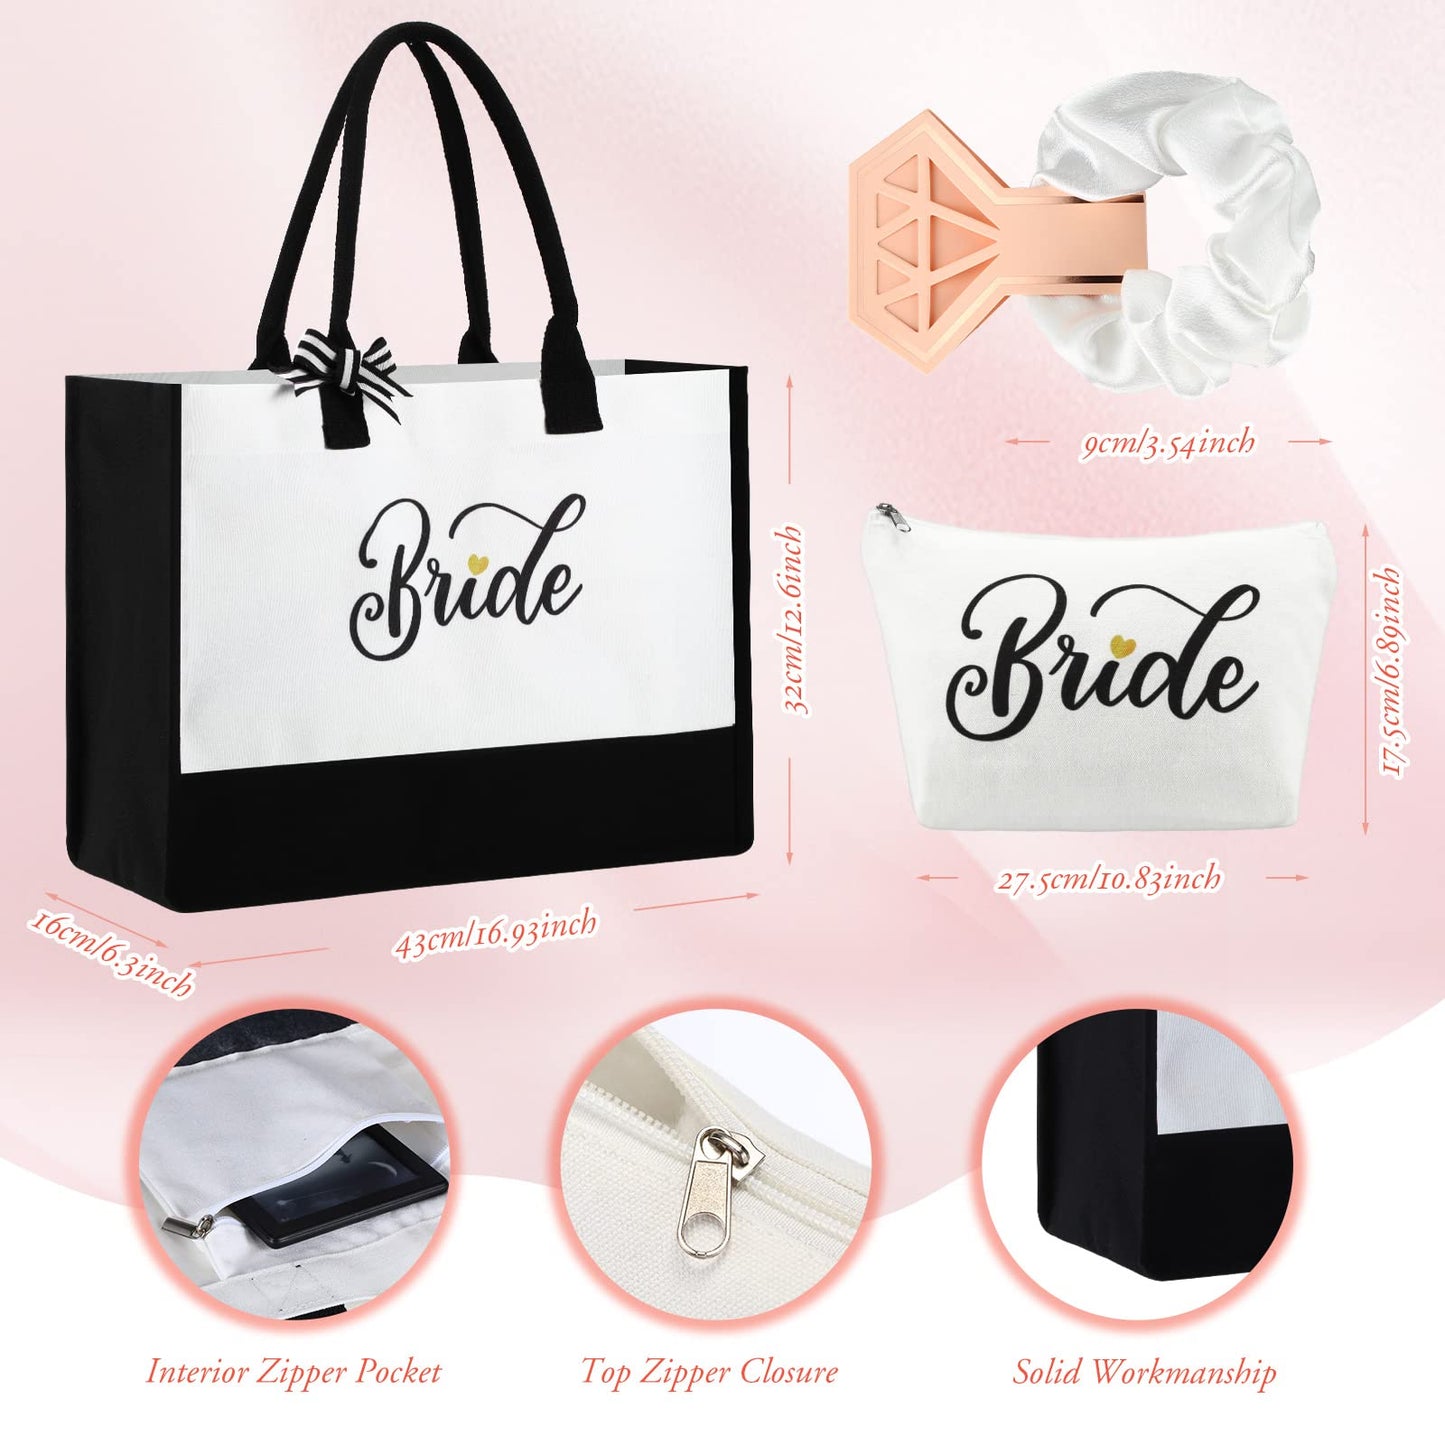 LEIFIDE Bride Tote Bag Bride Gifts Set 5 Pcs Makeup Bag Bride Stainless Tumbler Cup Bride Slippers White Hair Tie Slippers for Bridal Shower Bachelorette Party Wedding Day Gifts for Bride (Classic)